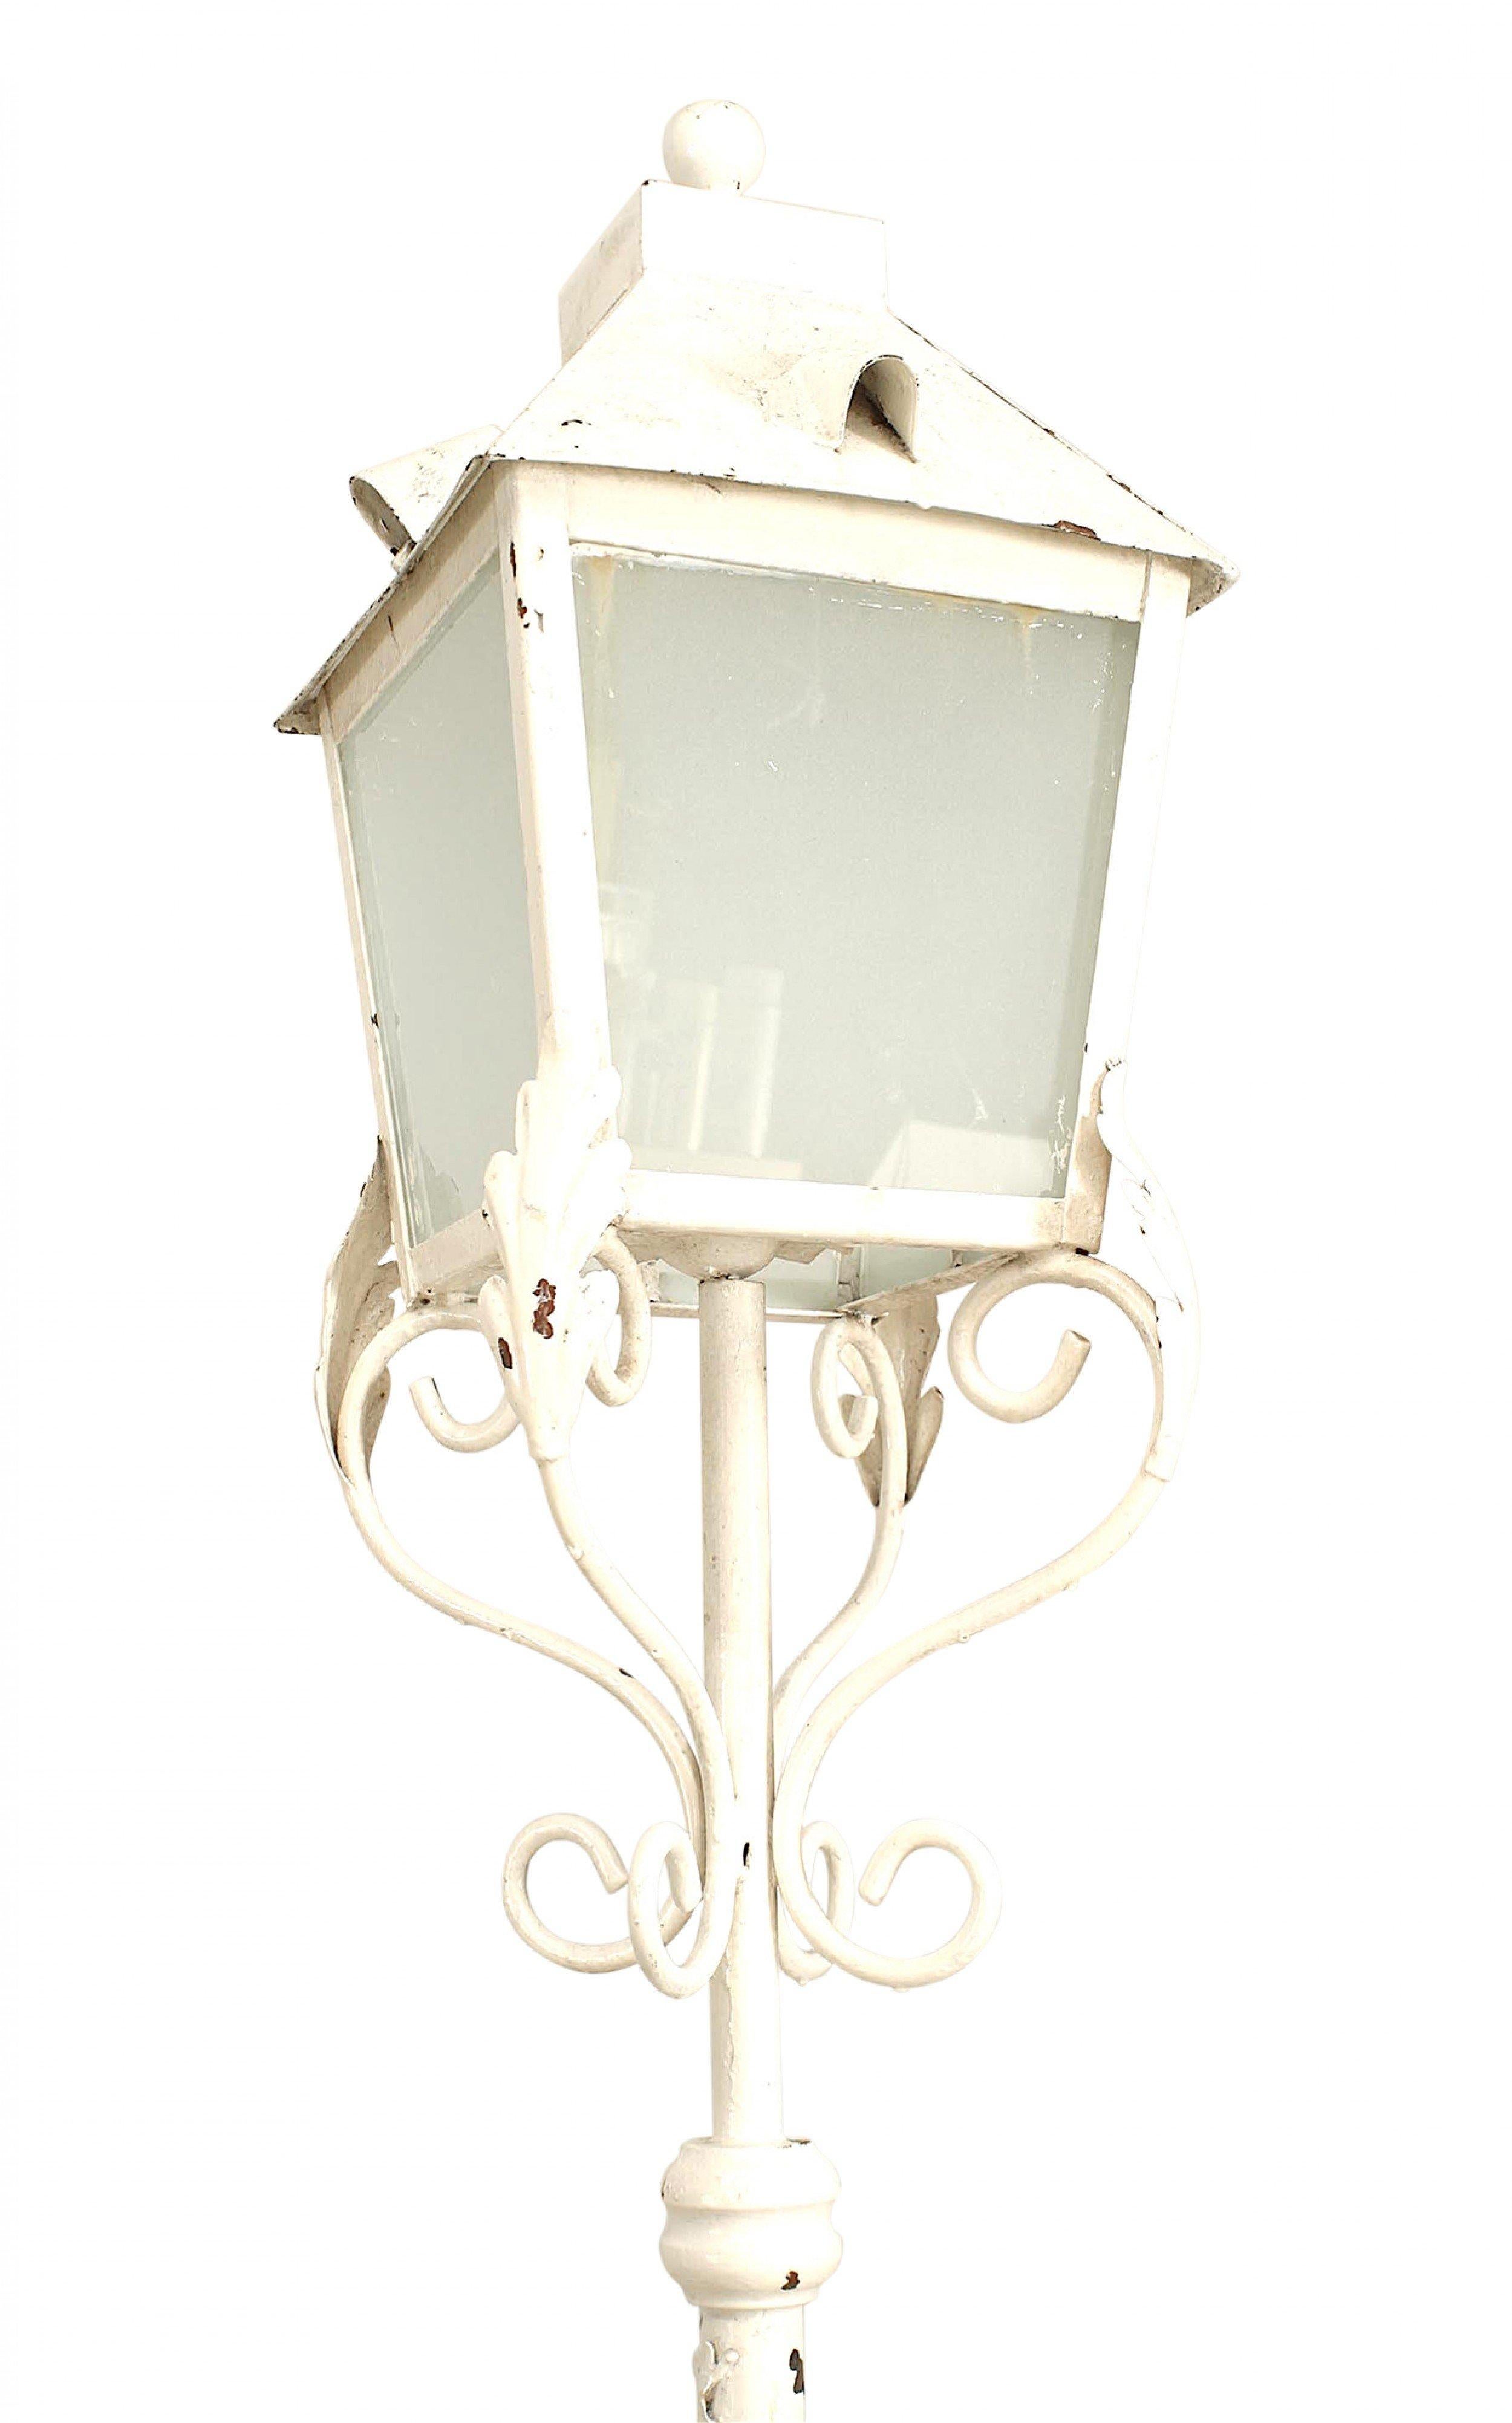 2 outdoor white painted iron floor lamps standing on 4 scroll legs with a 4 glass panel lantern top (priced each).
  